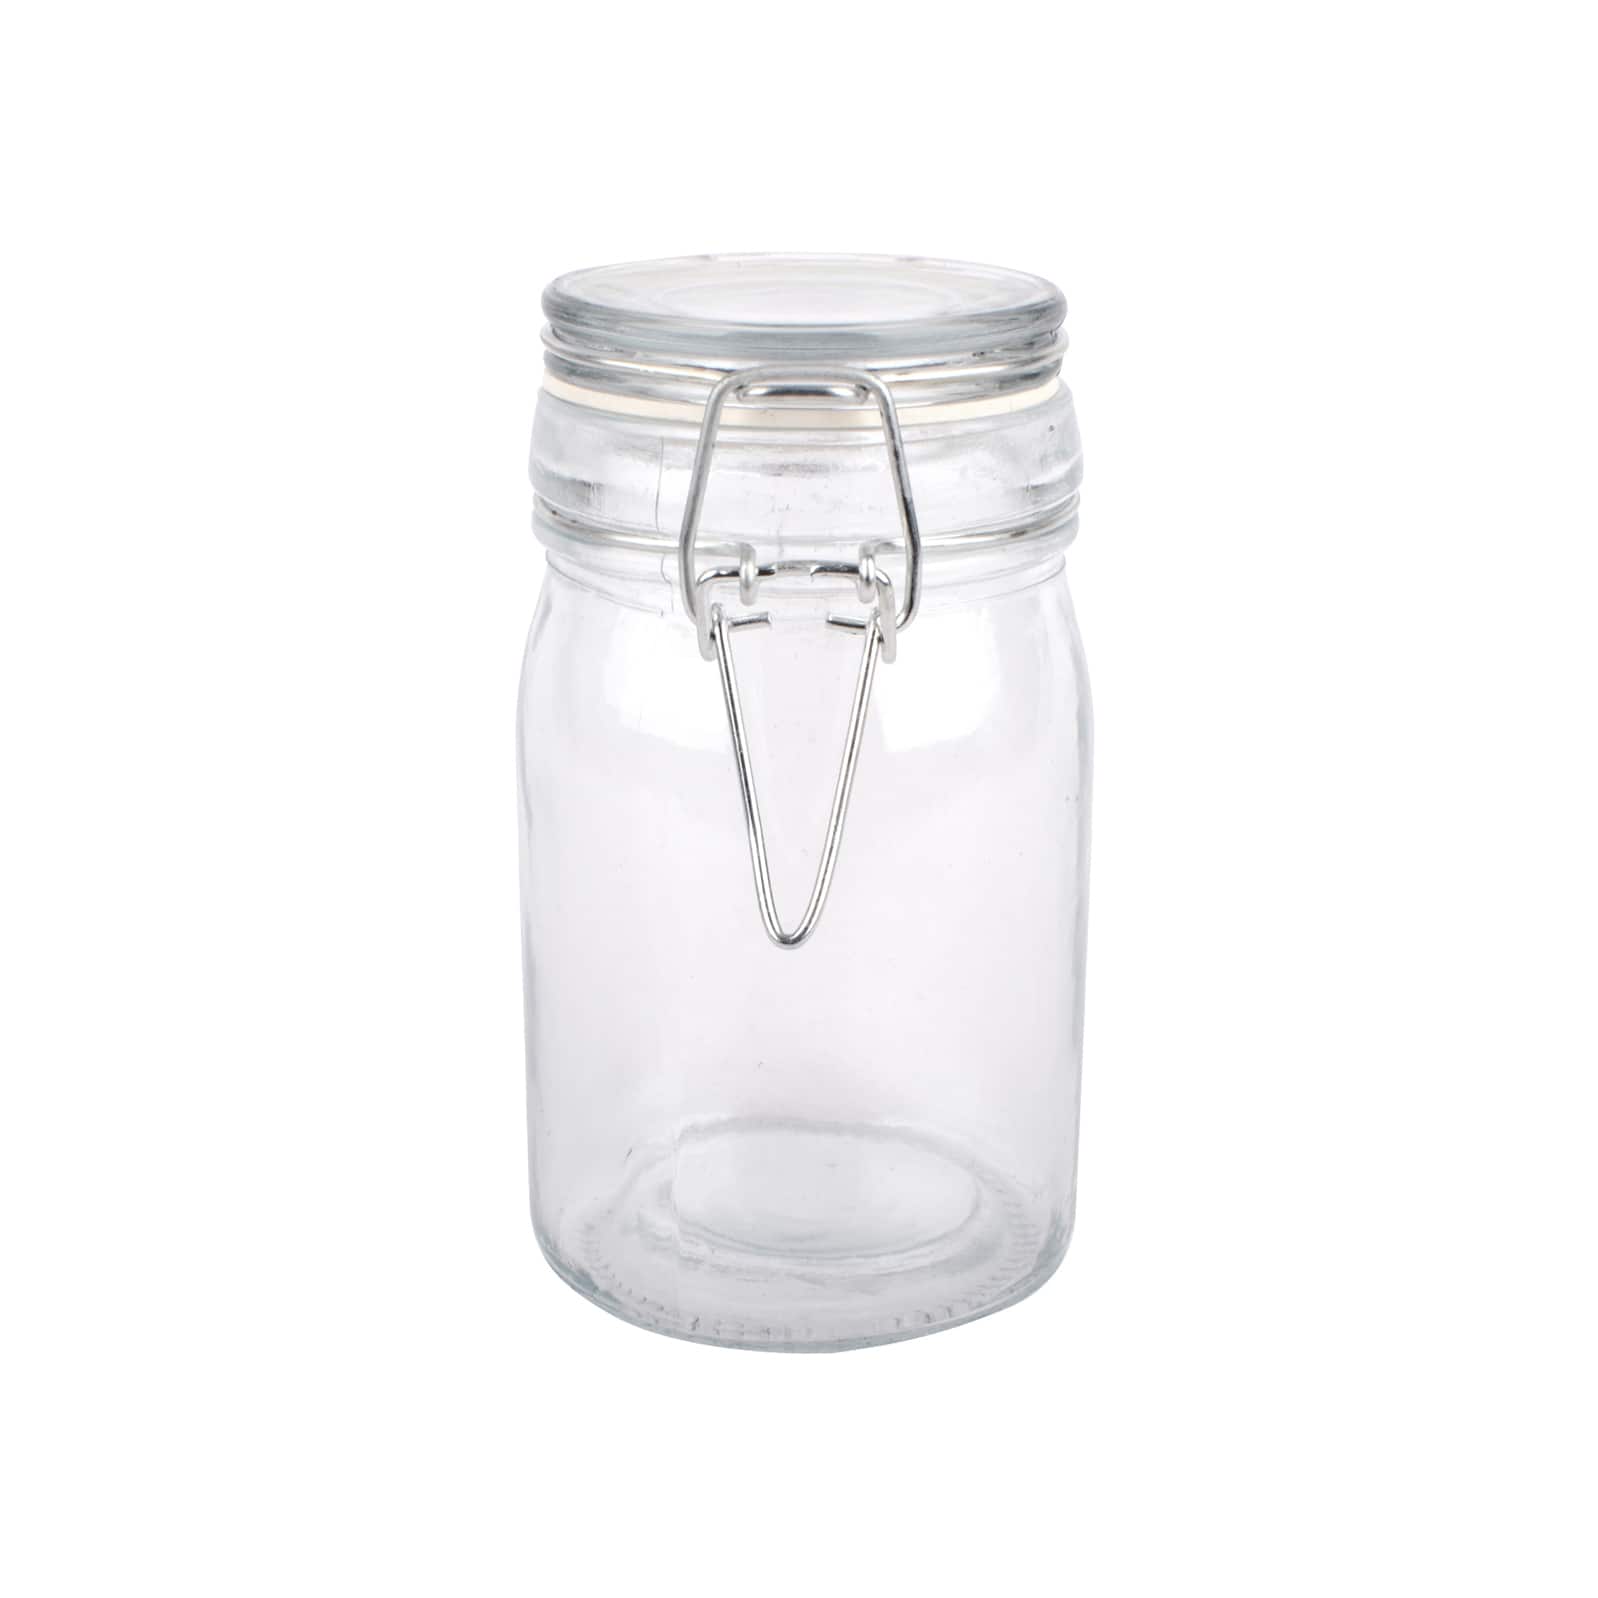 12 Pack: Quart Wide Mouth Glass Jar by Ashland®